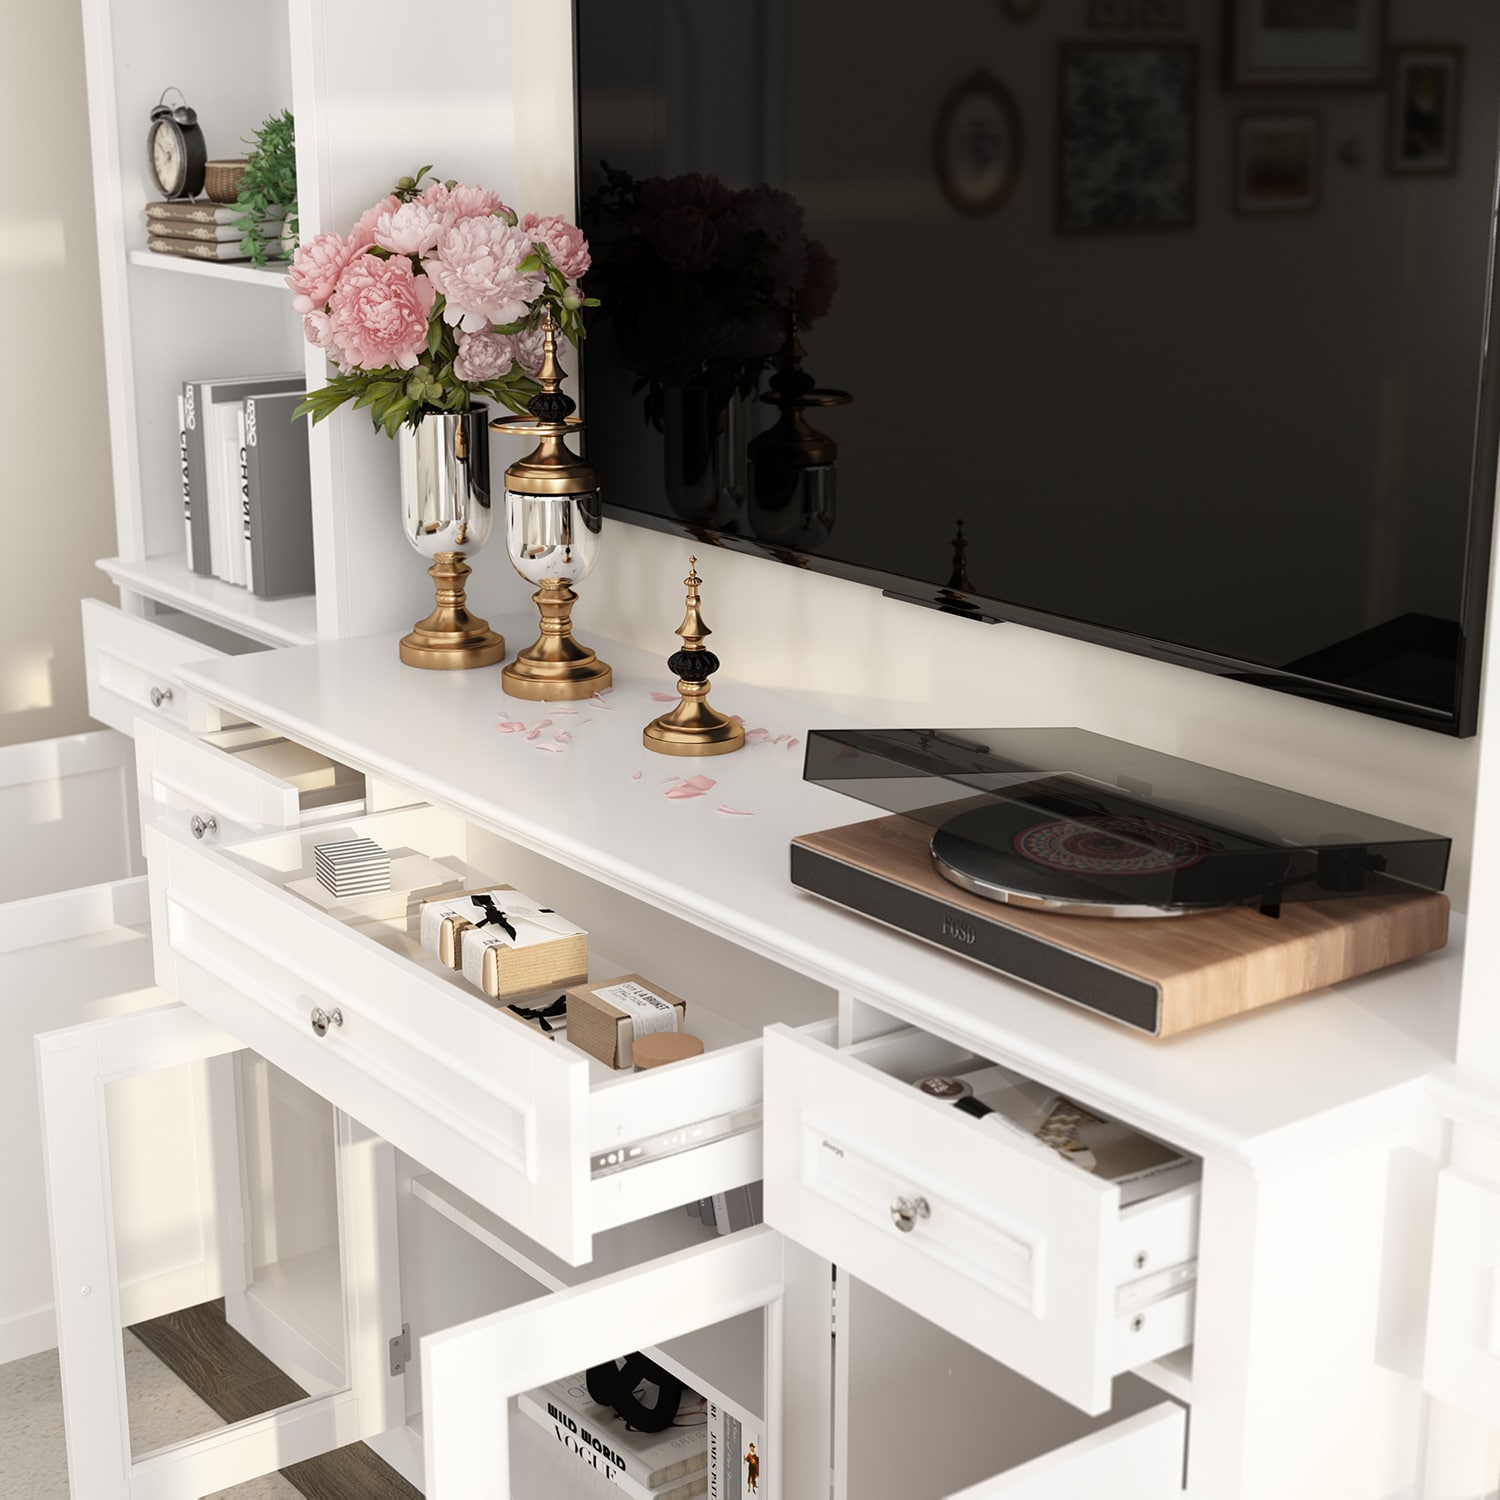 FUFU&GAGA Modern/Contemporary White Tv Cabinet (Accommodates TVs up to  65-in) in the TV Stands department at